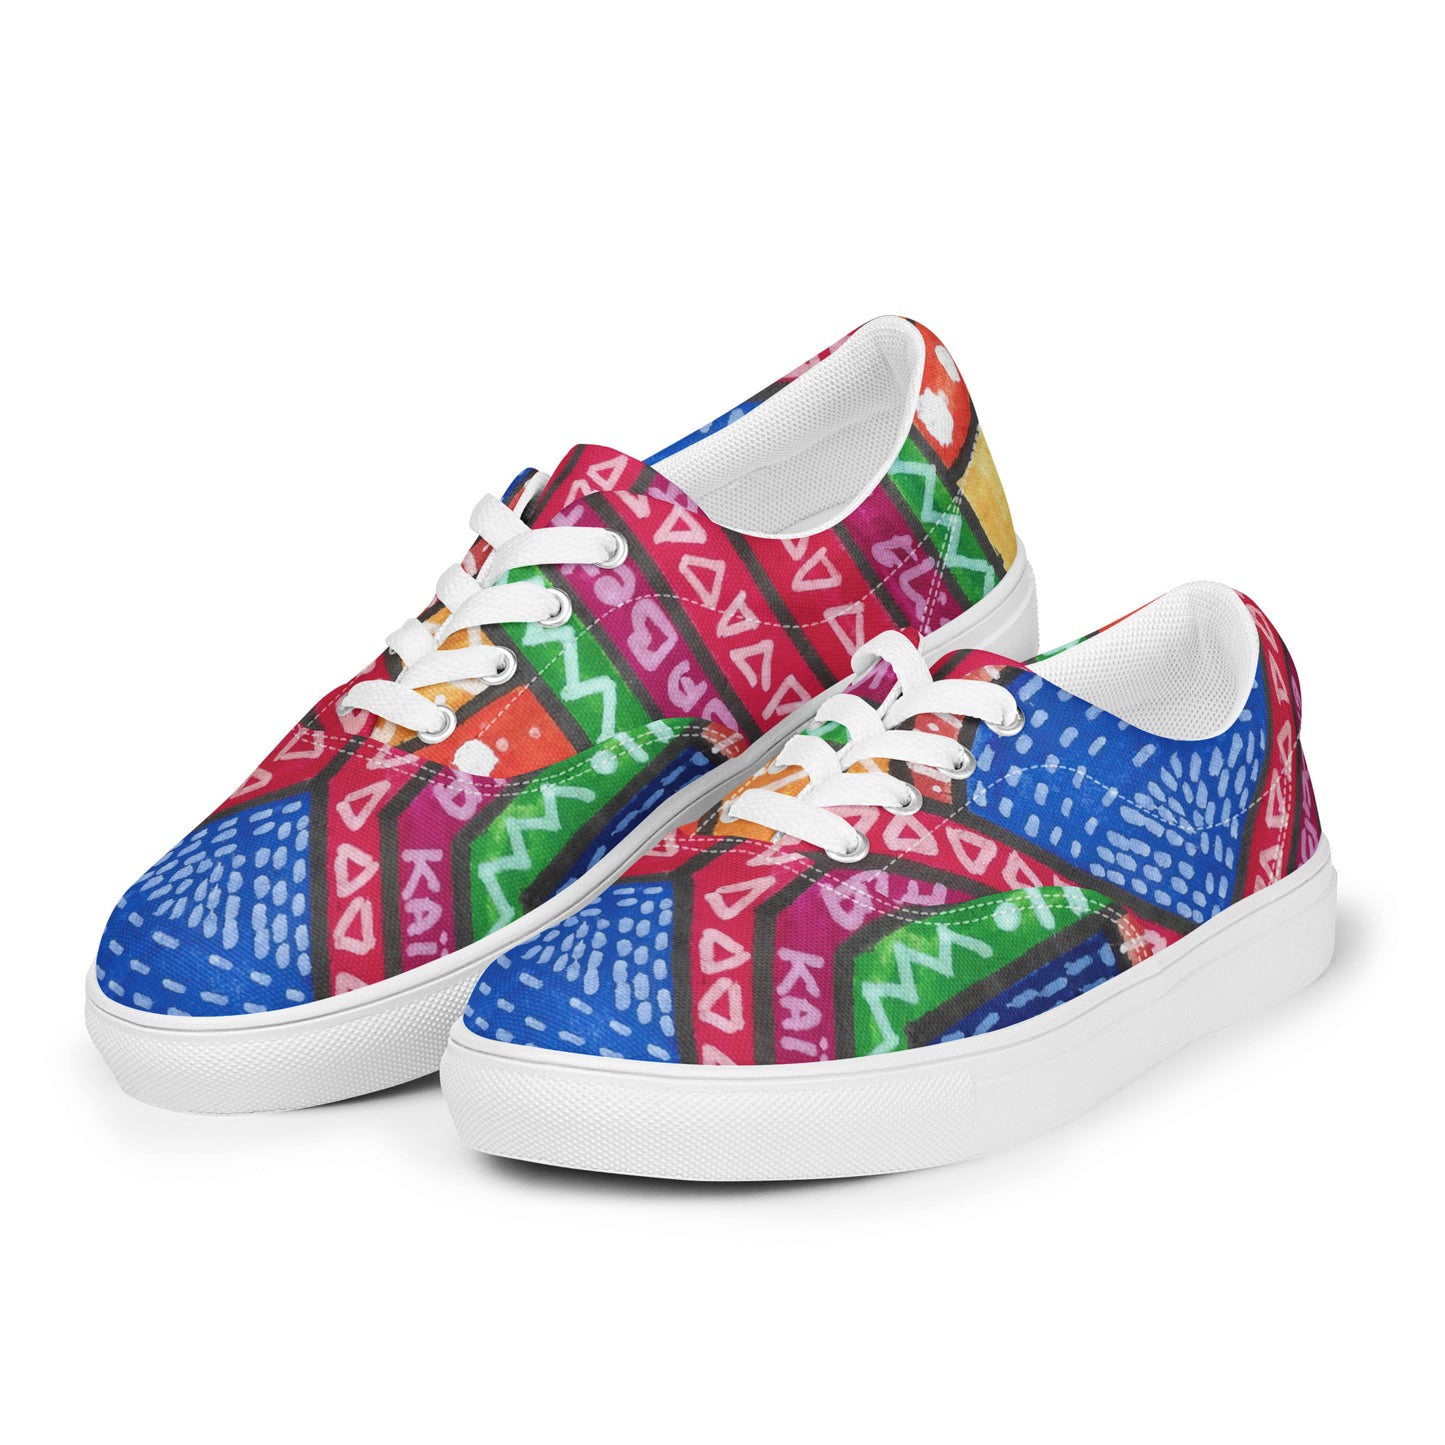 TIYI - Men's canvas trainers with laces